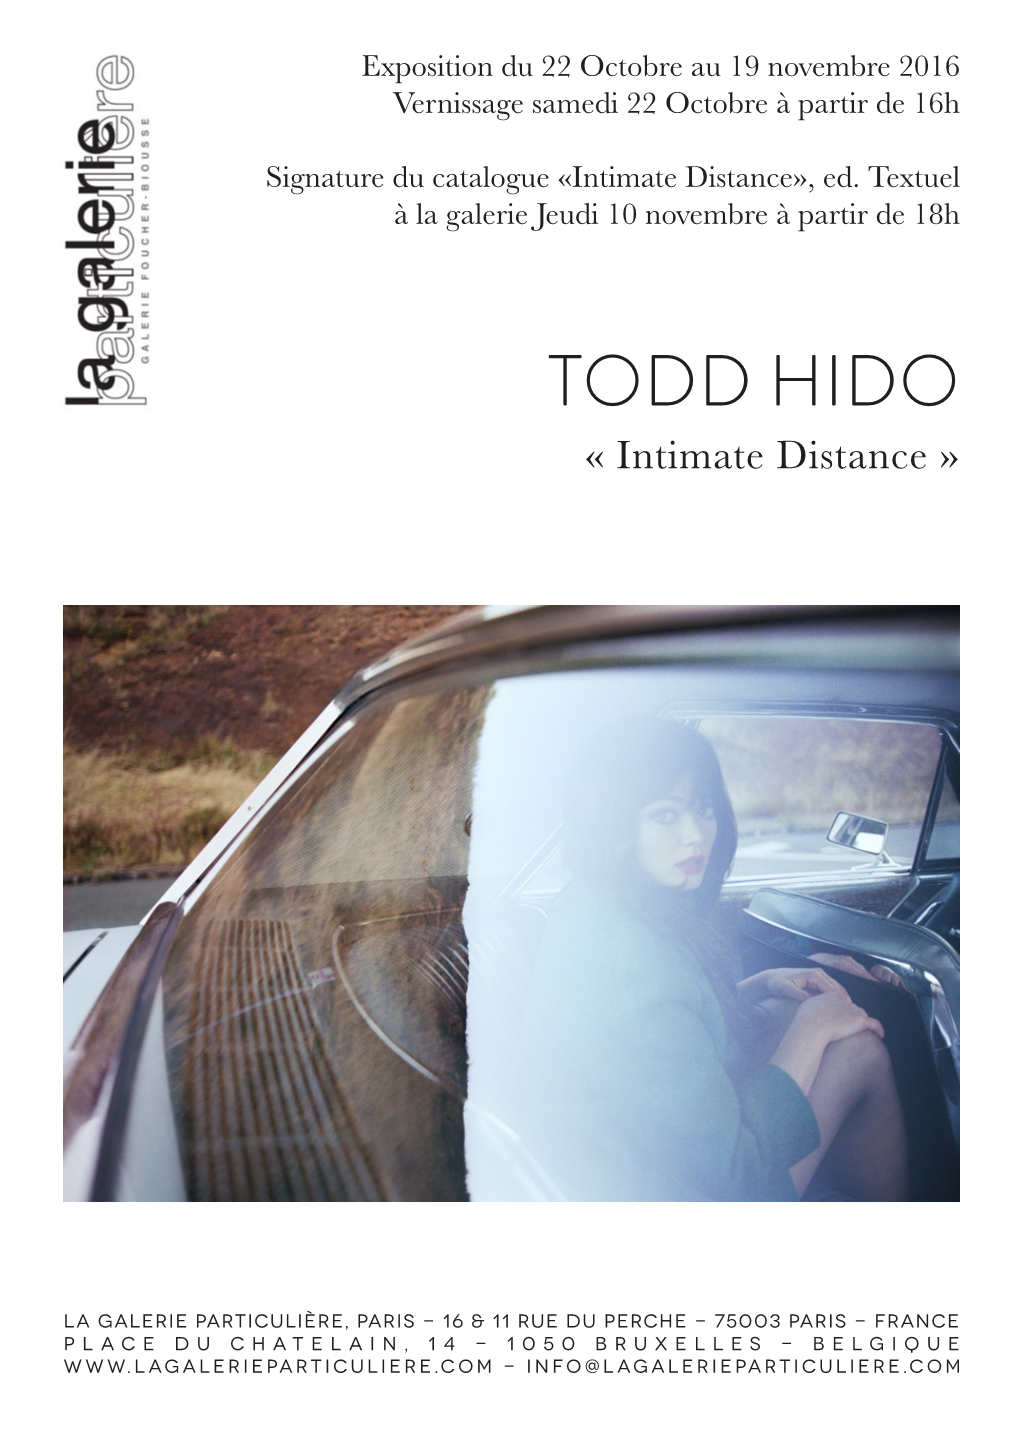 TODD HIDO « Intimate Distance »